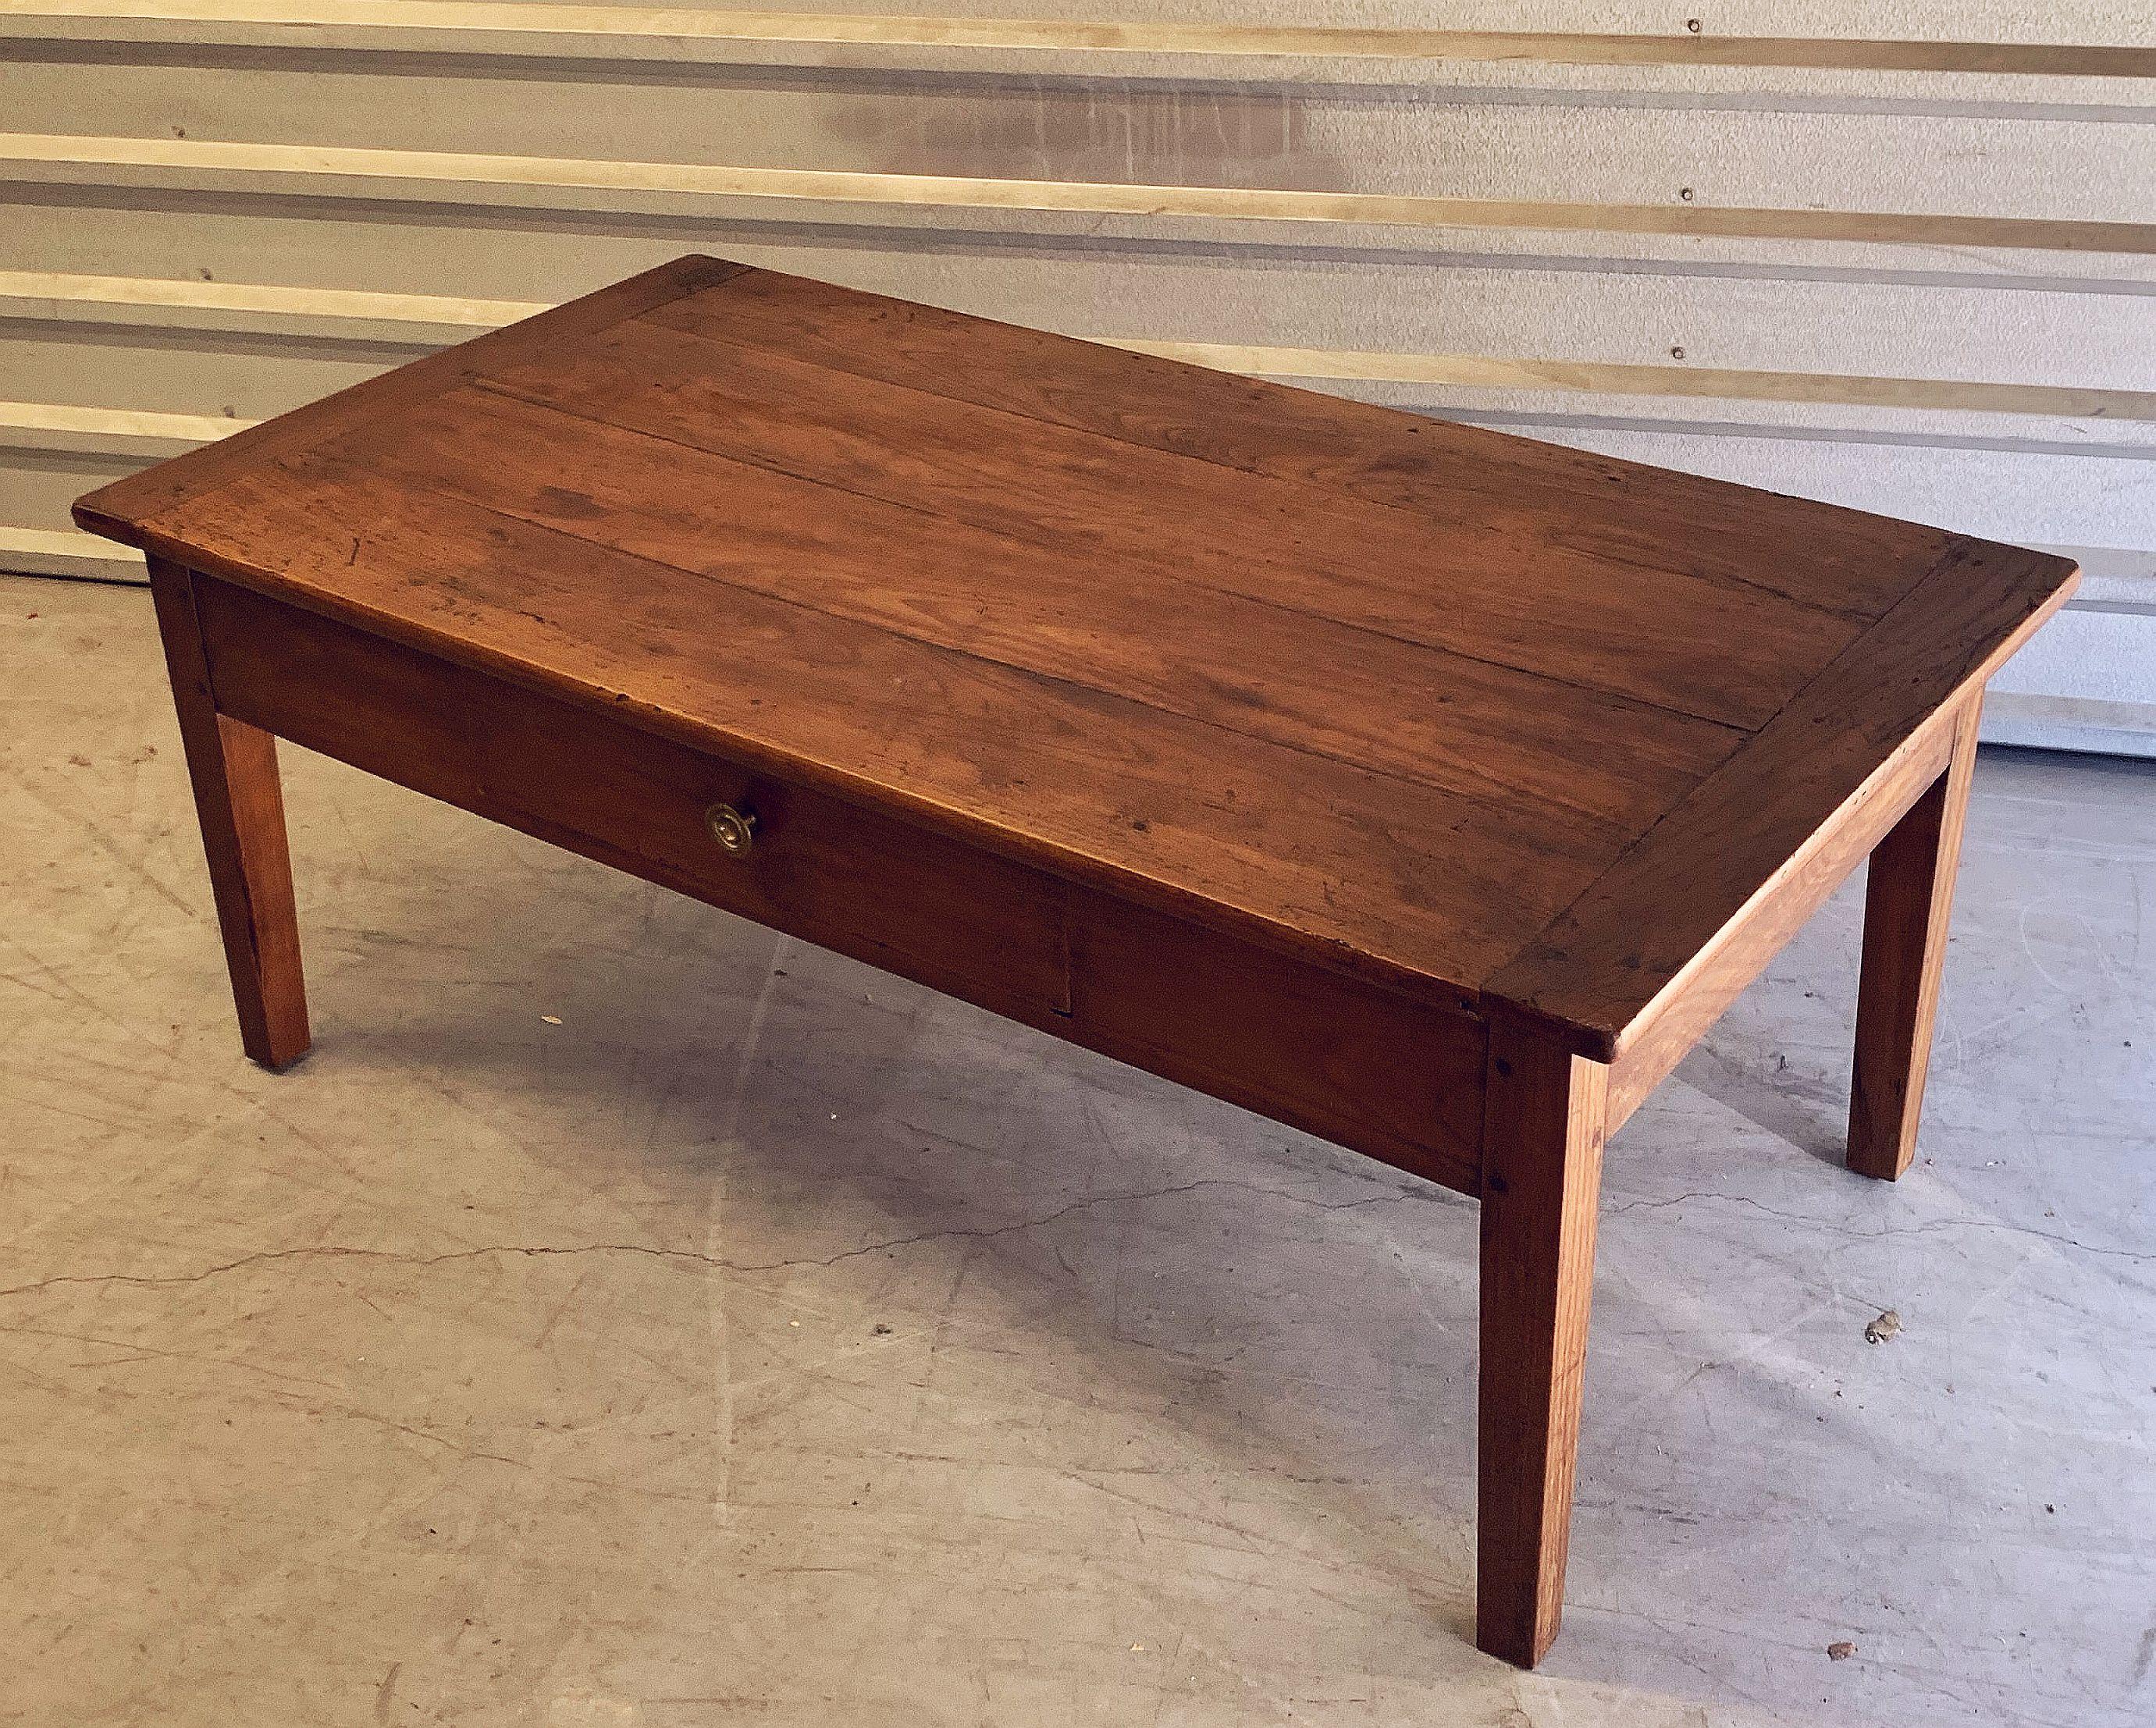 A large French cocktail or coffee (low) table of finely patinated cherry wood, featuring a handsome rectangular plank top set upon a frame of four pegged and tapered legs and one facing drawer with brass knob pull.

The whole with a fine patina,